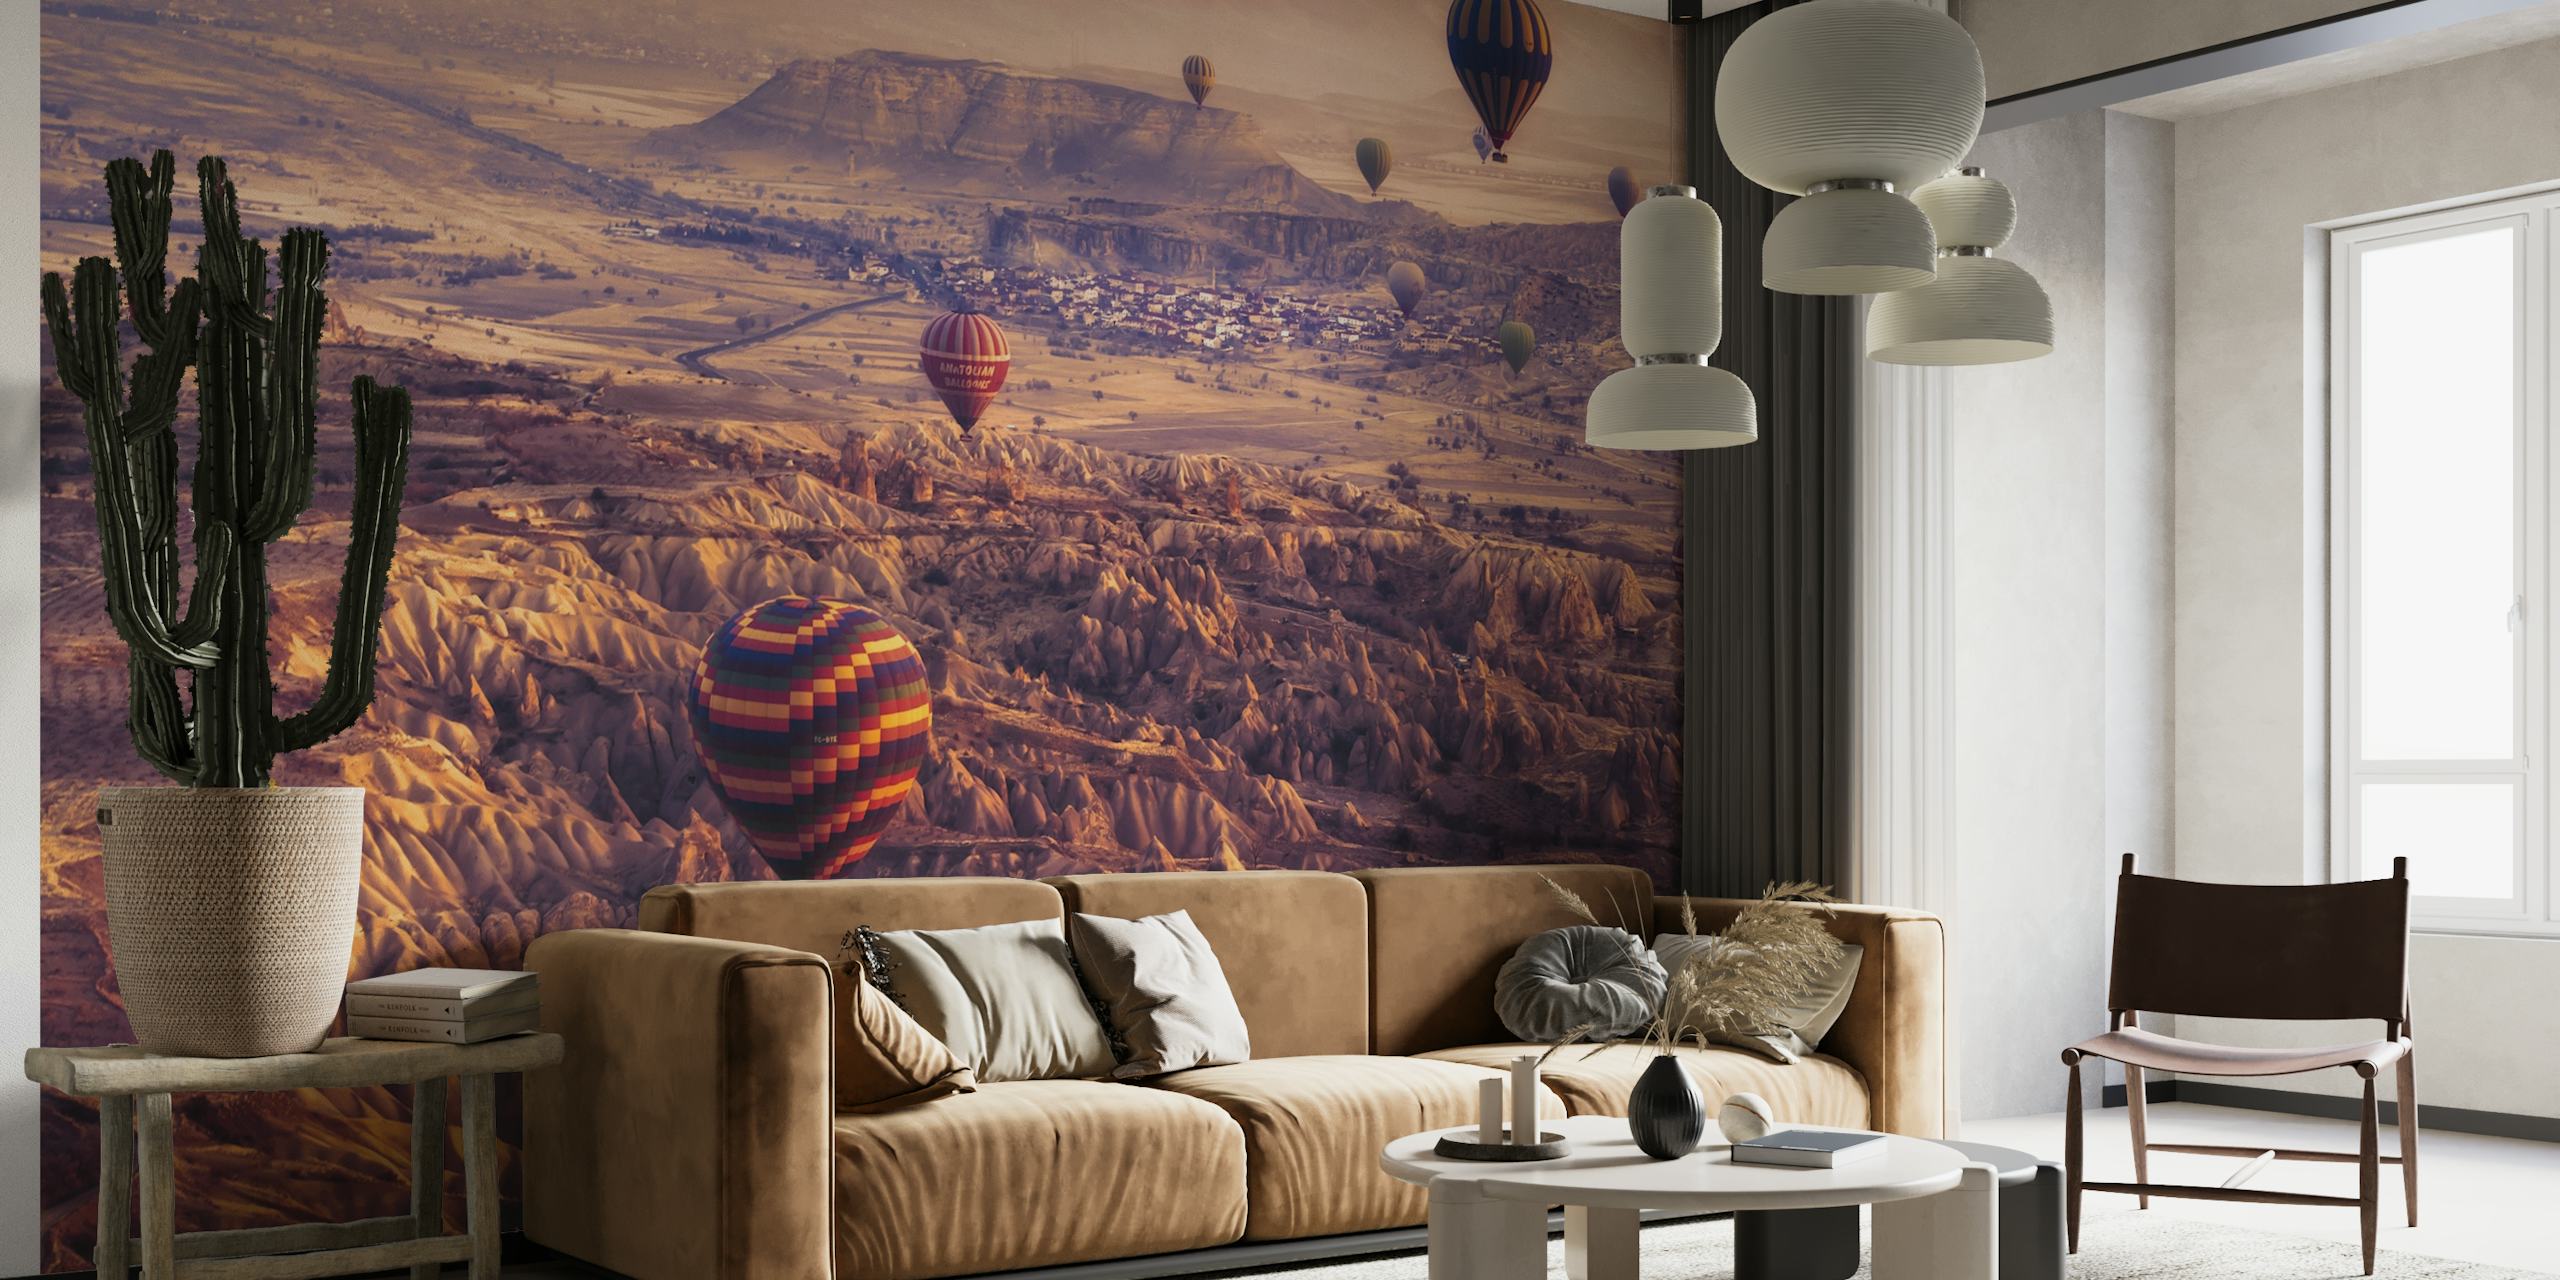 Hot air balloons over scenic landscape wall mural